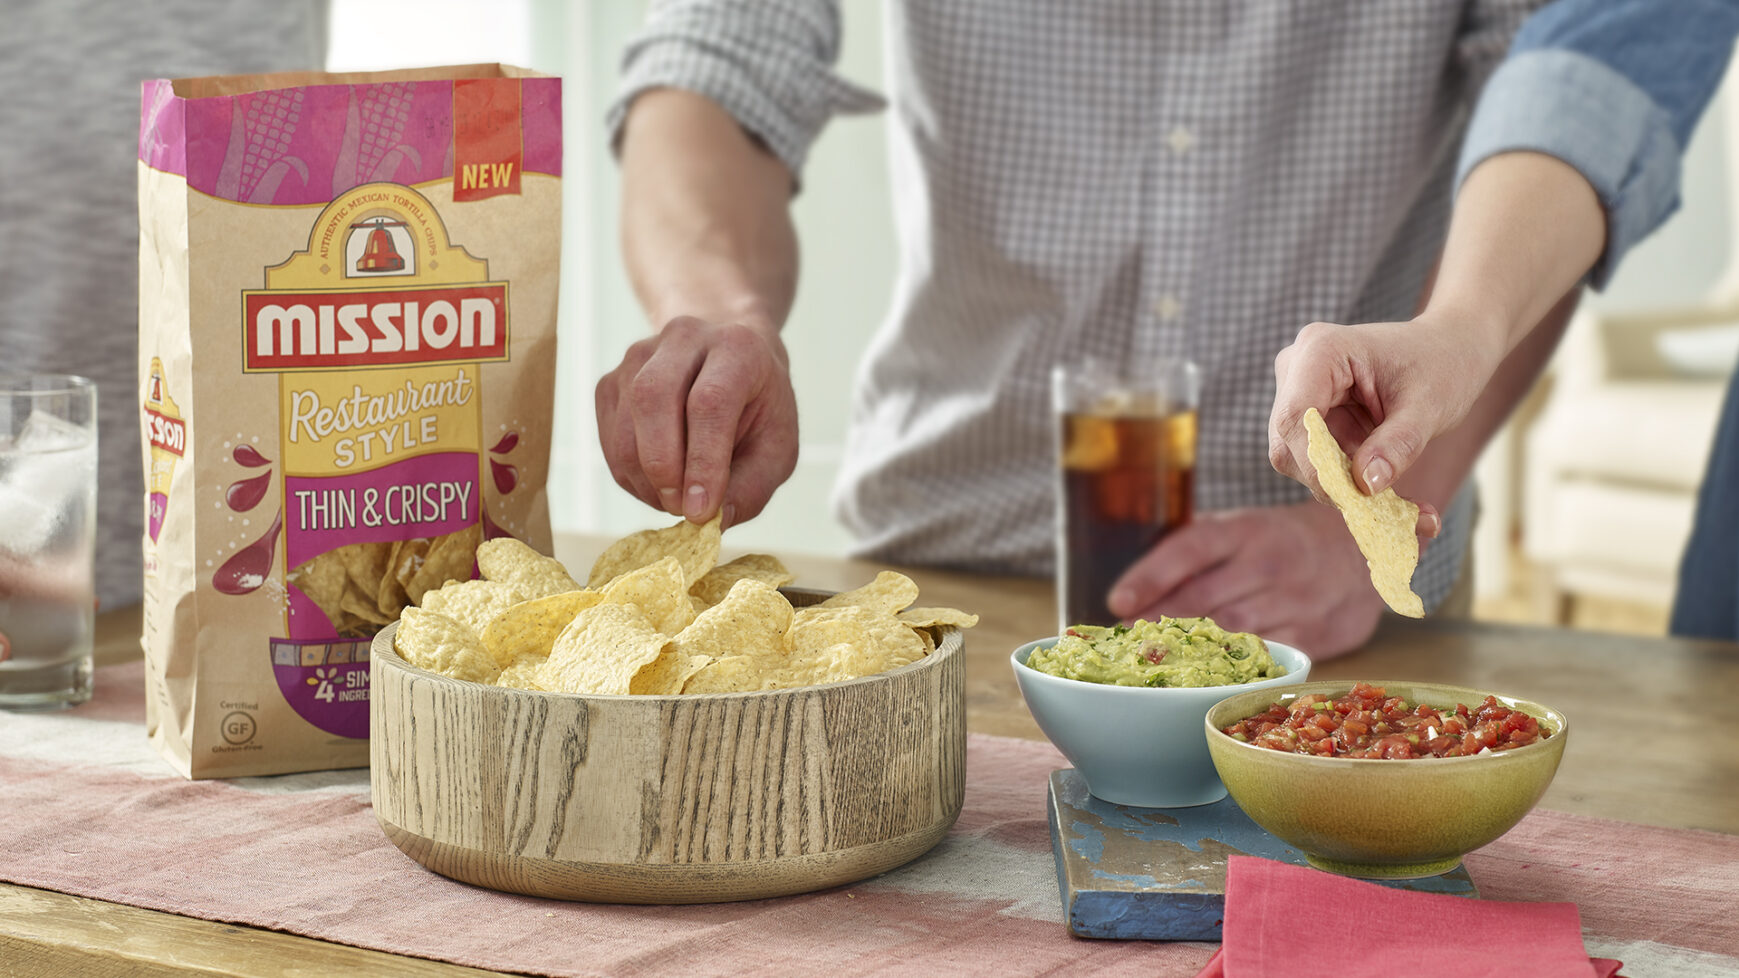 Hands serving Mission tortilla chips from a bowl with guacamole and salsa on the side